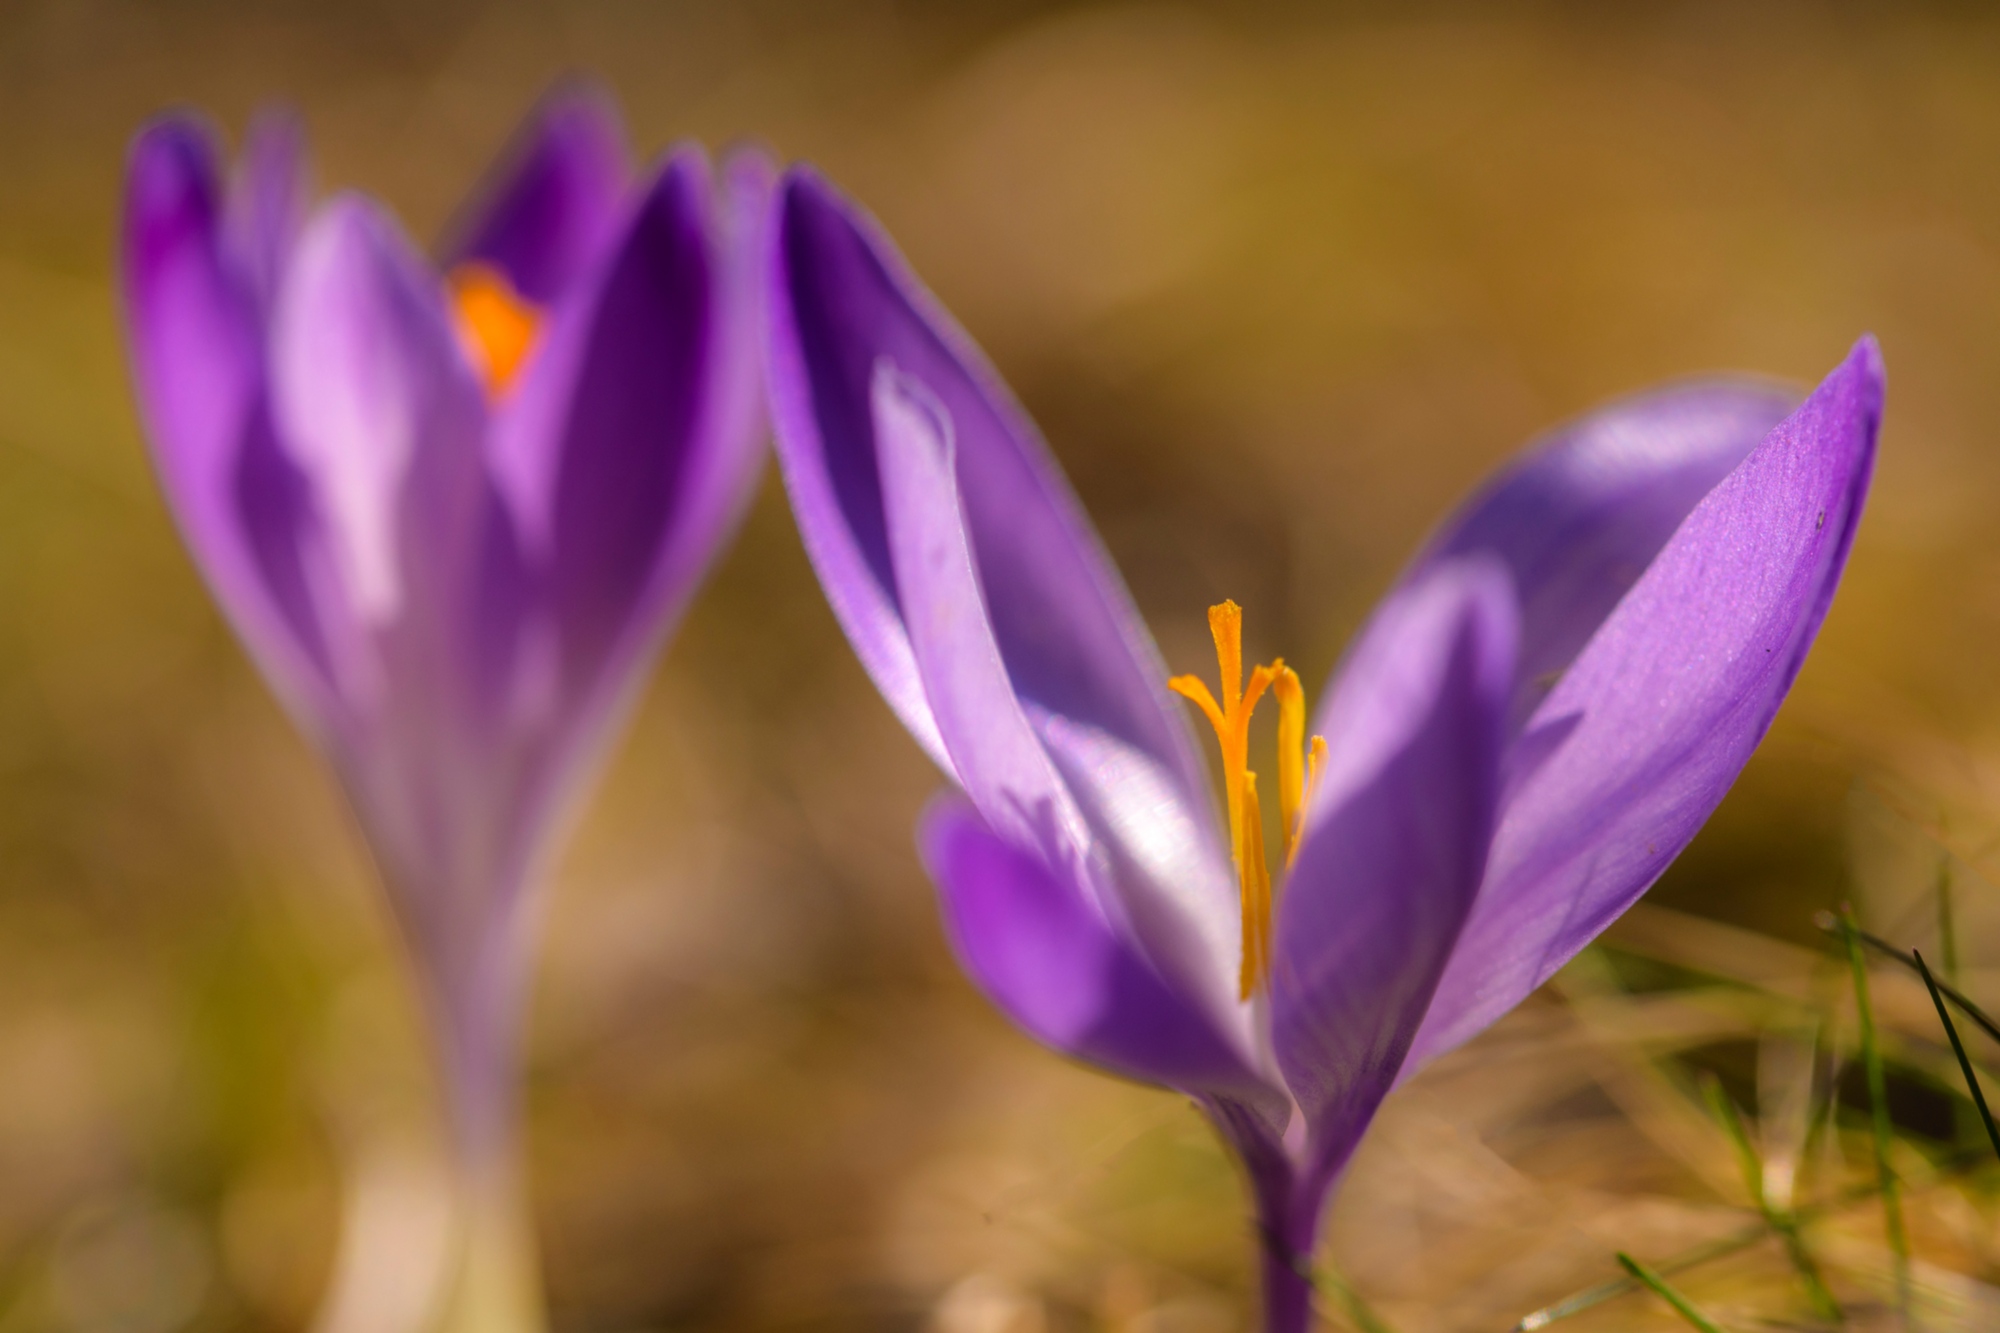 The flowering of the Crocus in the Parco delle Foreste Casentinesi